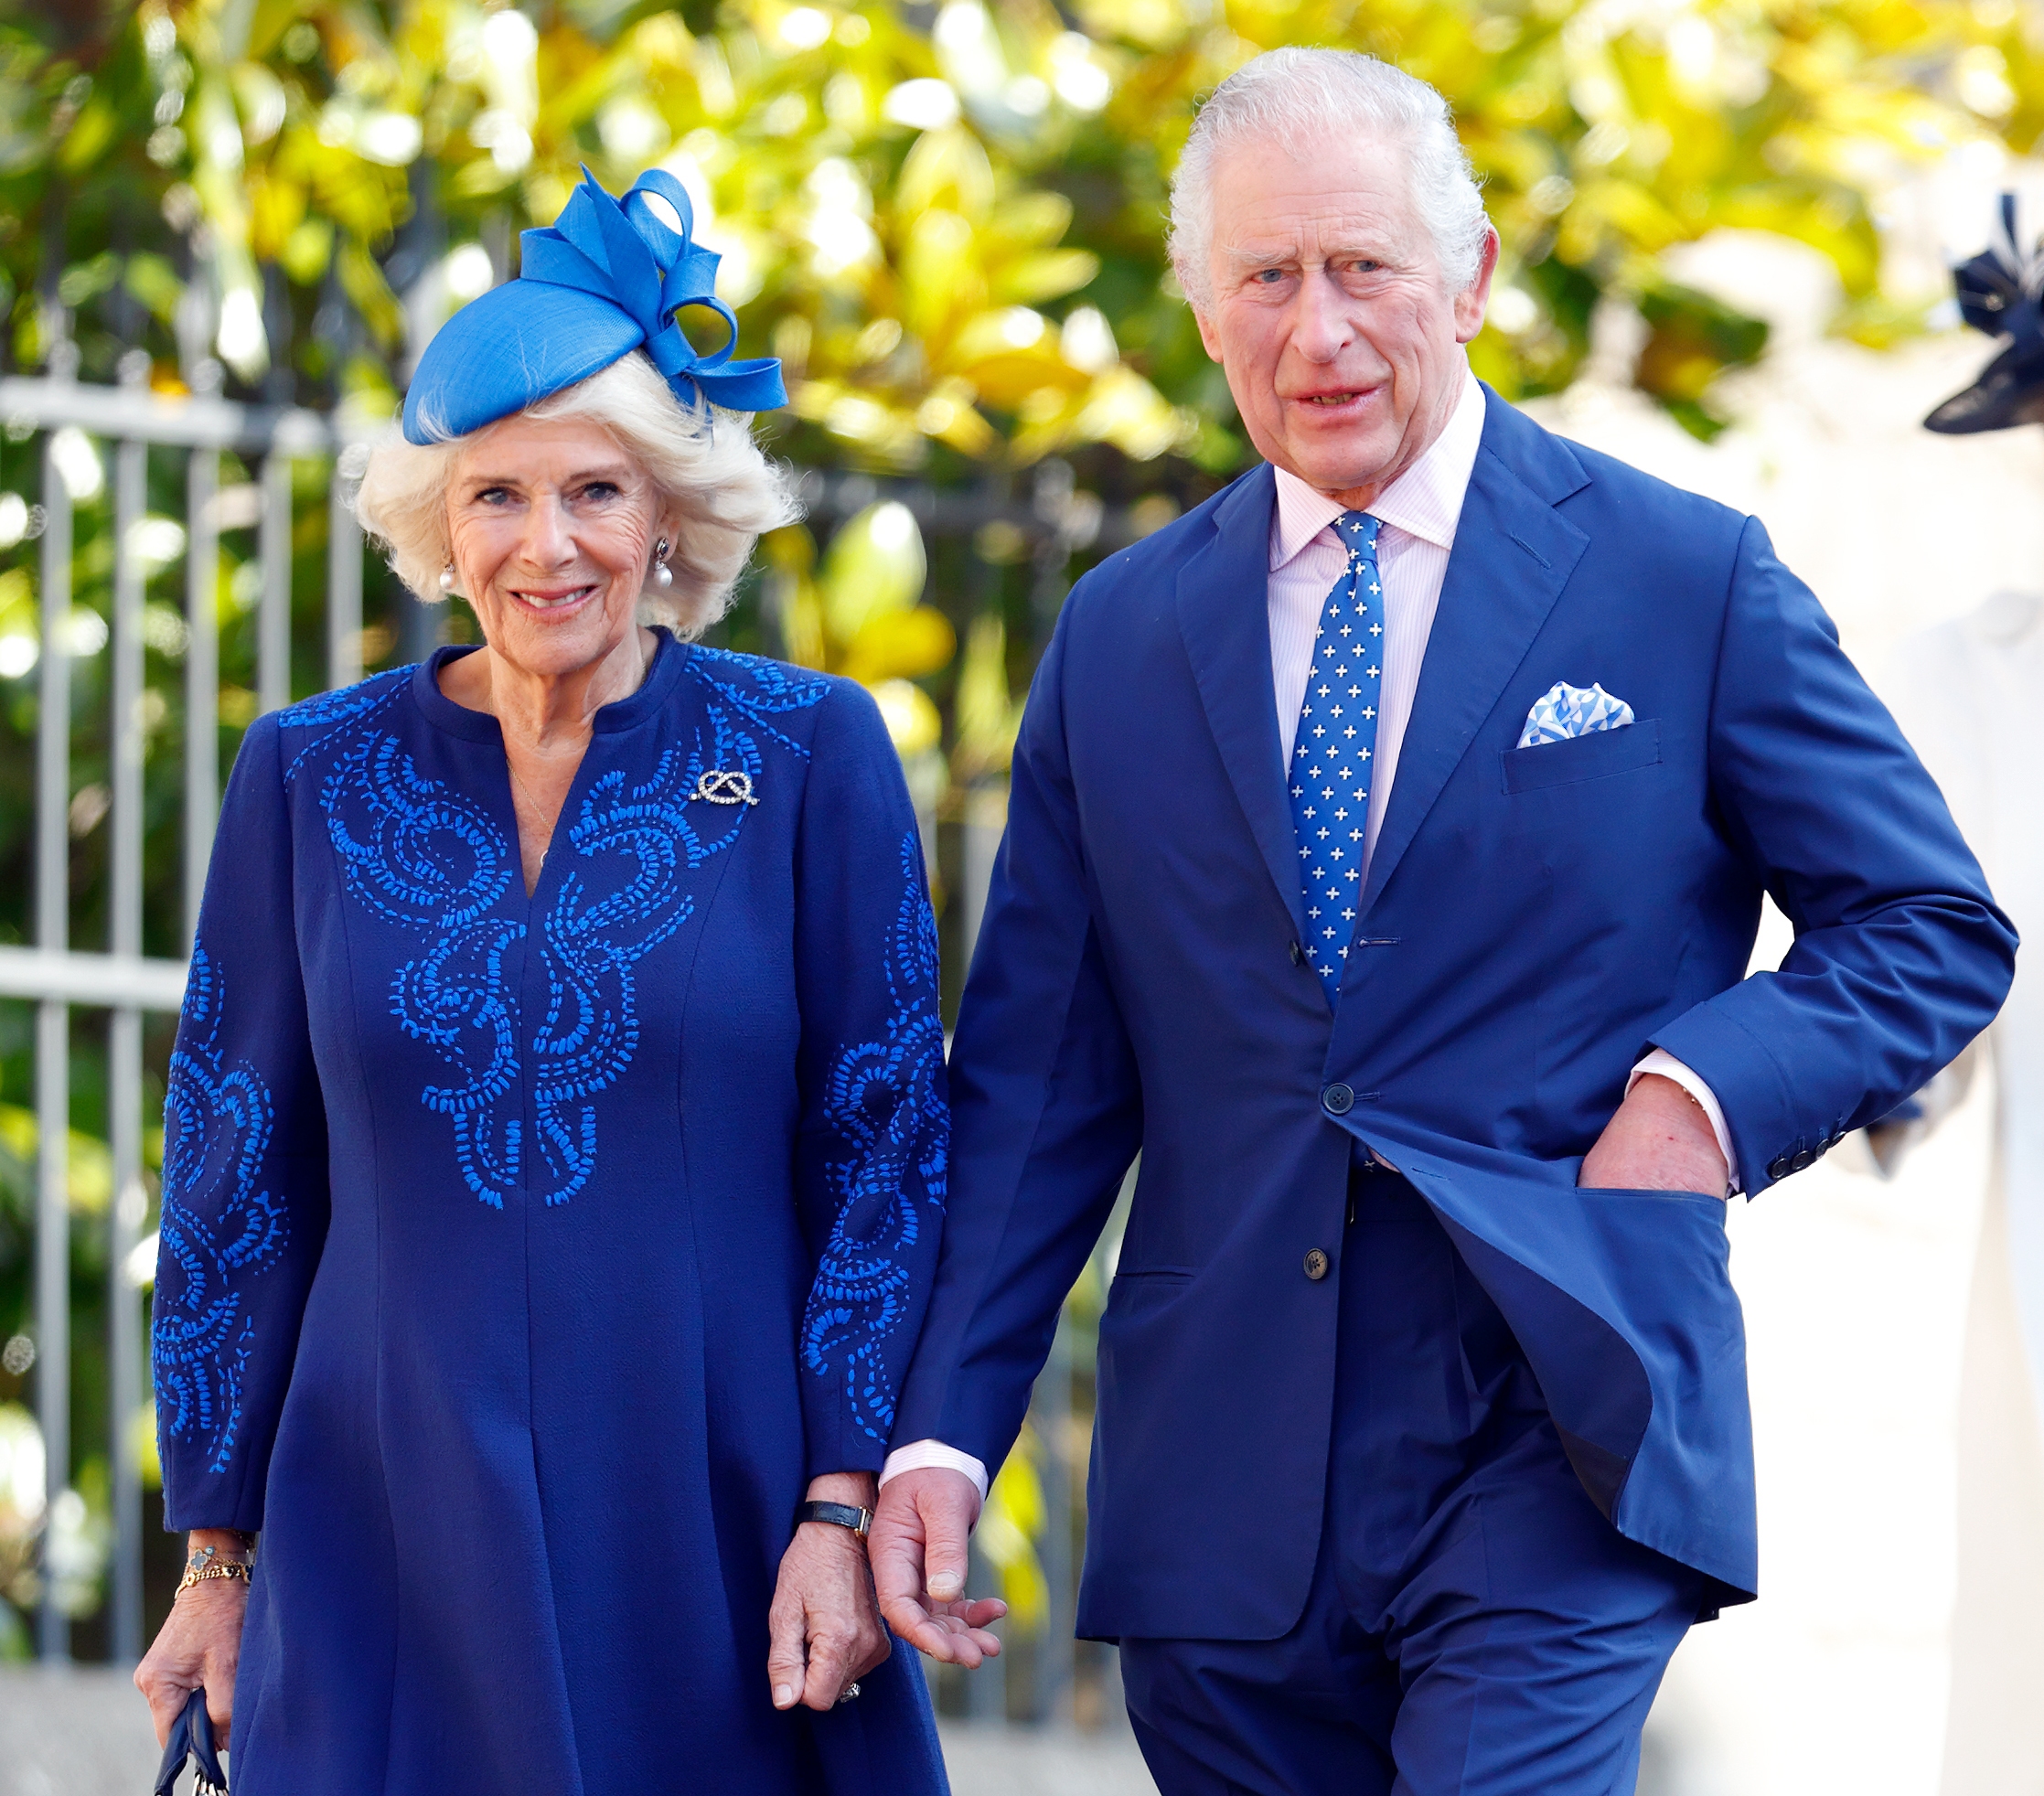 PHOTO: Camilla, Queen Consort and King Charles III attend the traditional Easter Sunday Mattins Service at St George's Chapel, Windsor Castle on April 9, 2023 in Windsor, England.